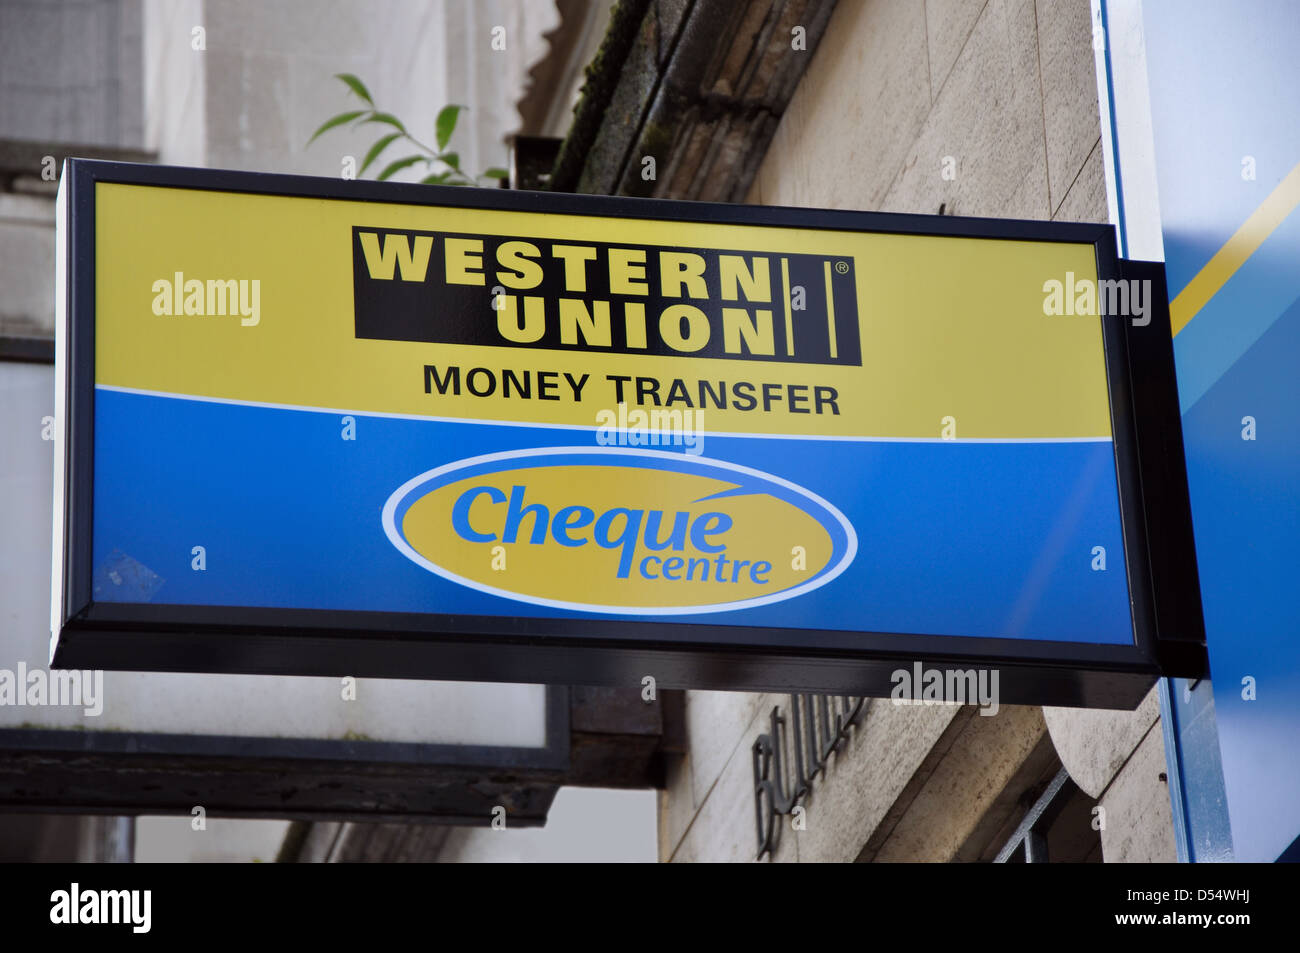 Western Union sign, Leicester, England, UK Stock Photo